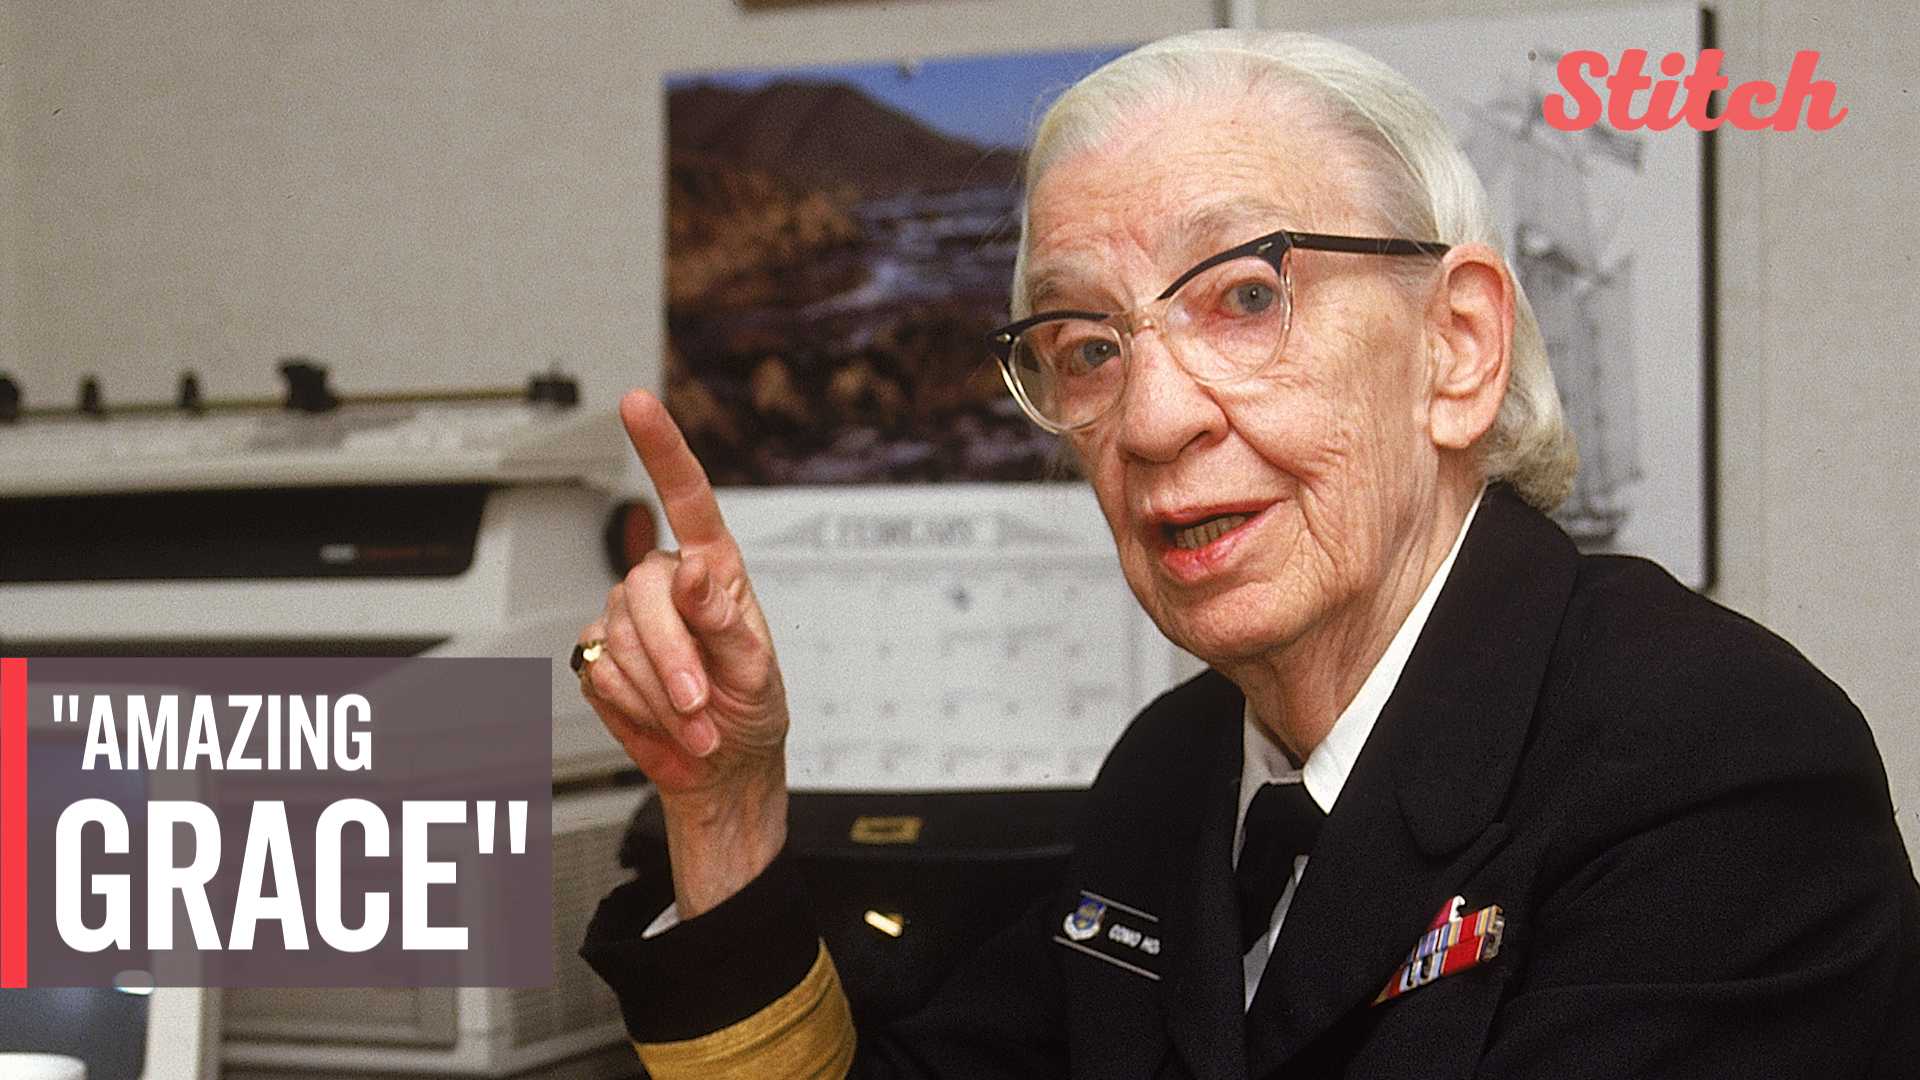 Grace Hopper's accomplishments forever changed the world of computer science